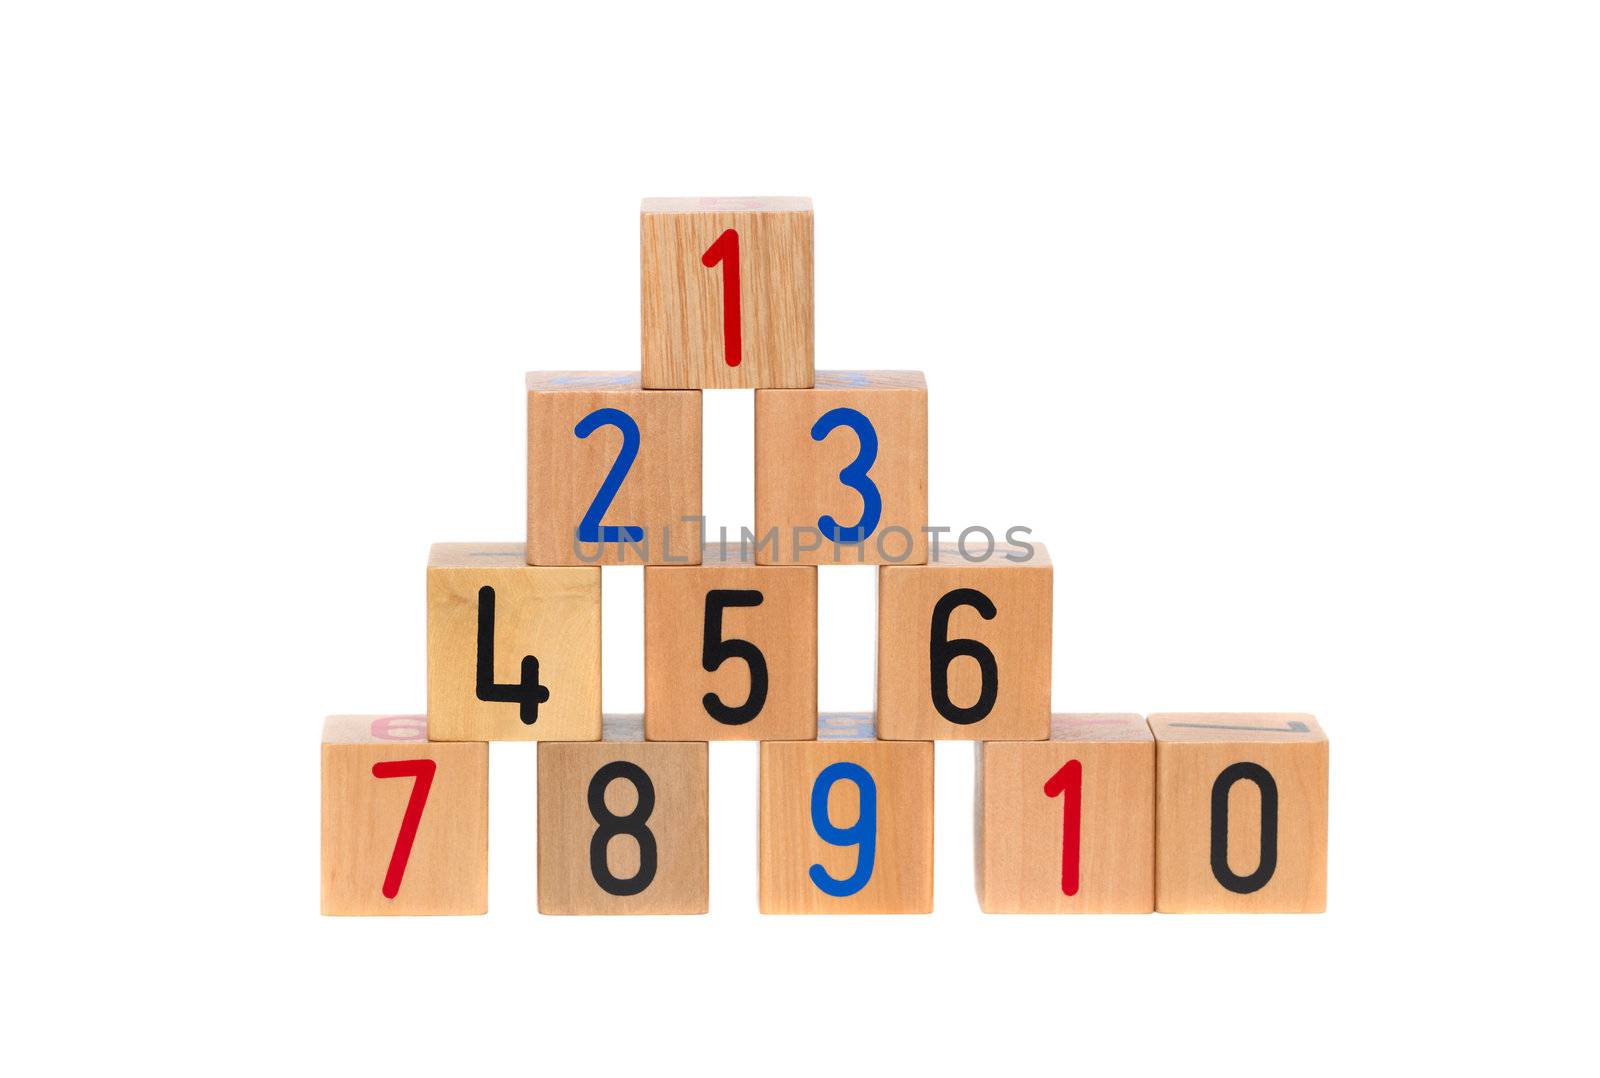 Wooden blocks with numbers by Olinkau